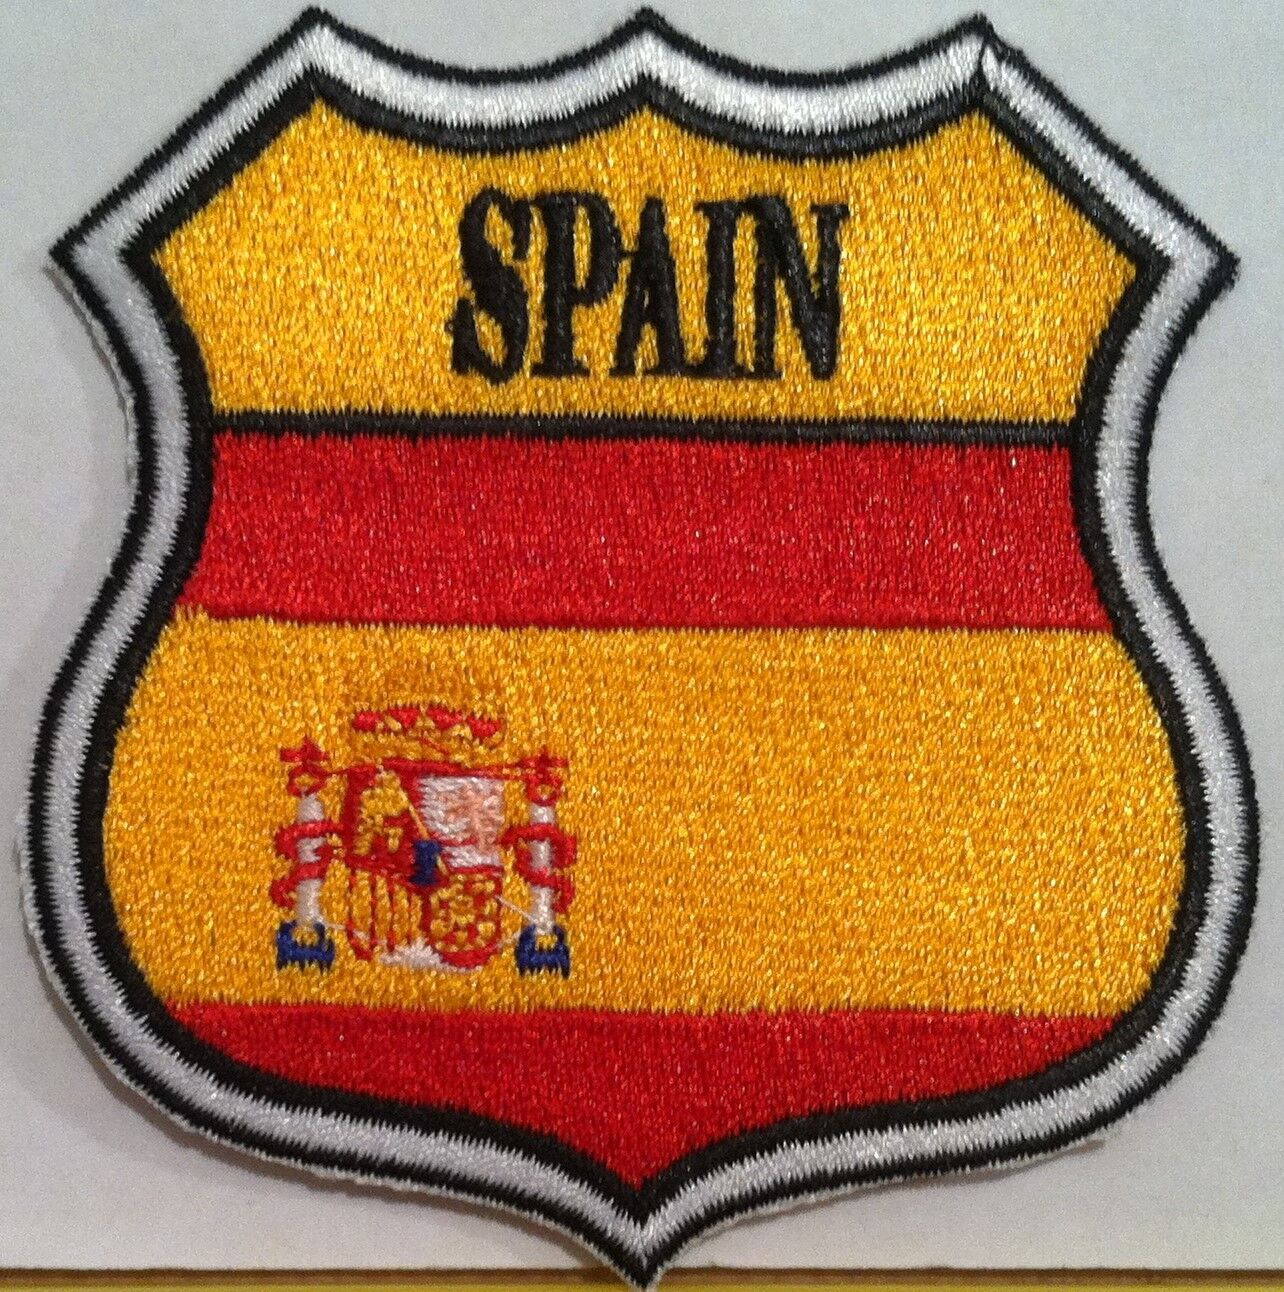 Espana / Spain Crest Tactical Military Flag Patch Shoulder With Hook & Loop